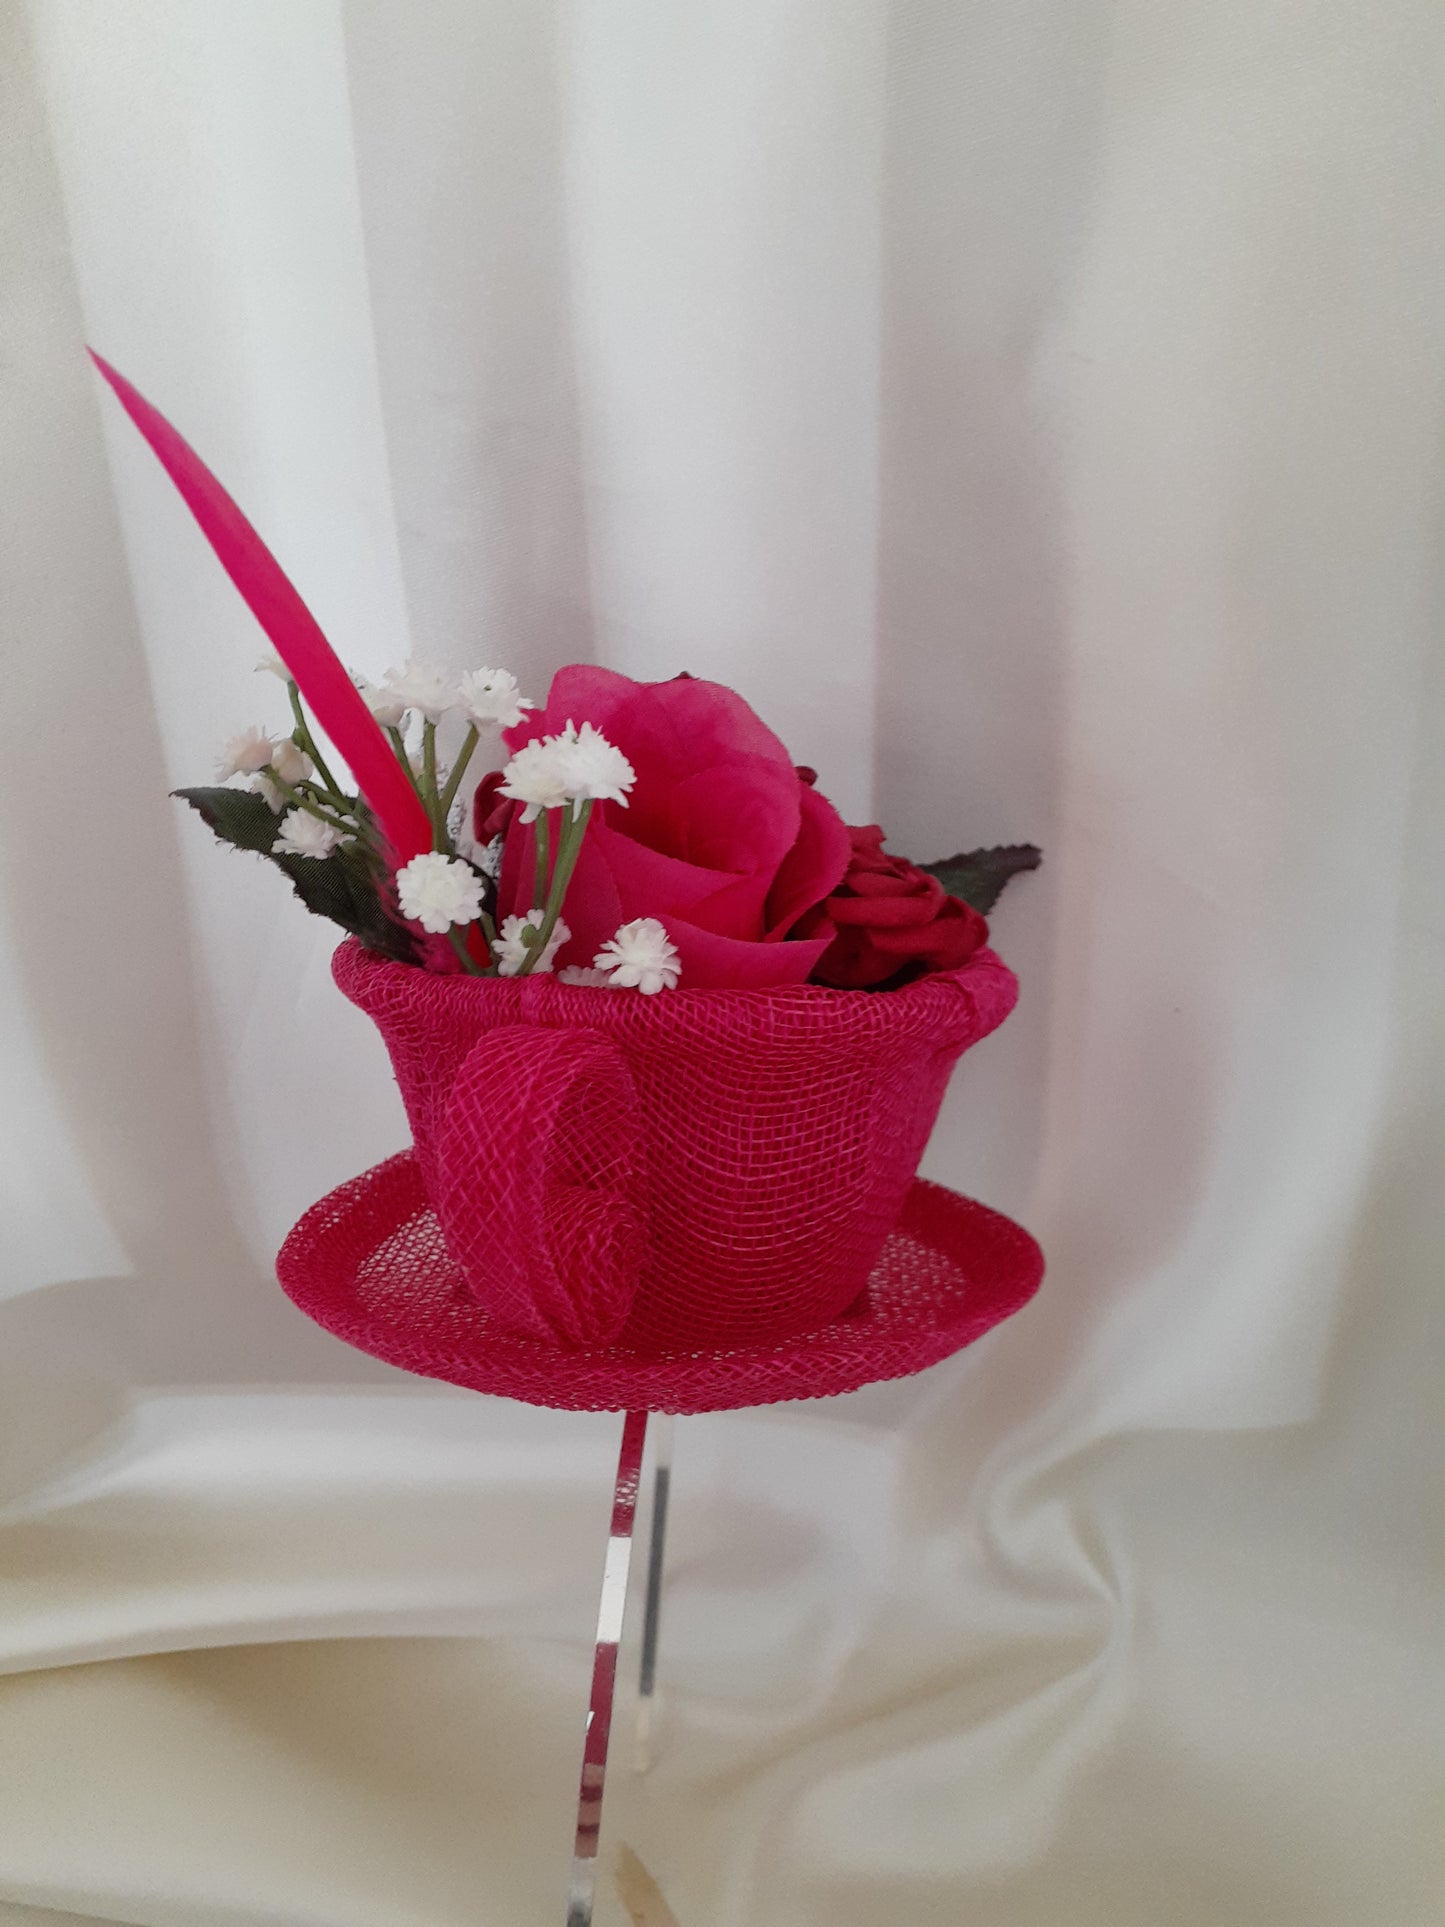 Pink and red rose cup and saucer headpiece